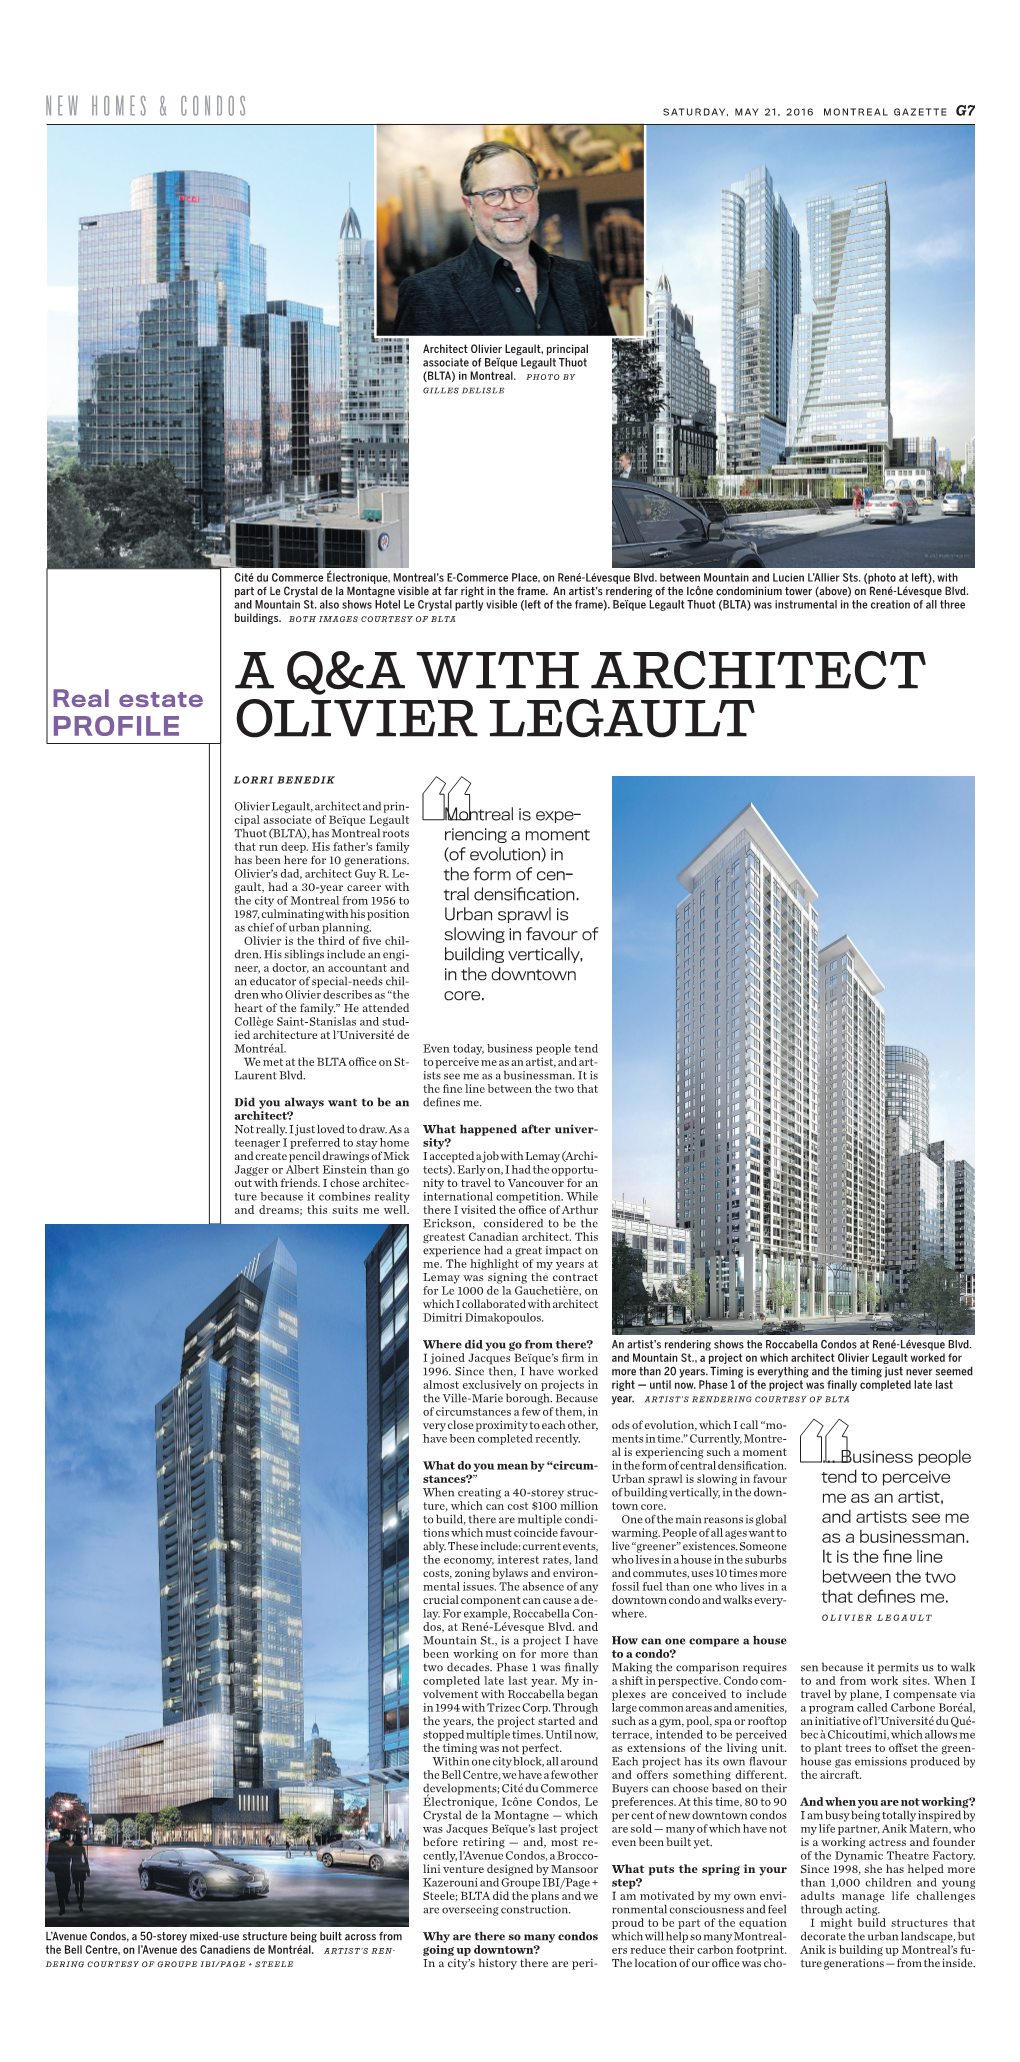 A Q&A with Architect Olivier Legault